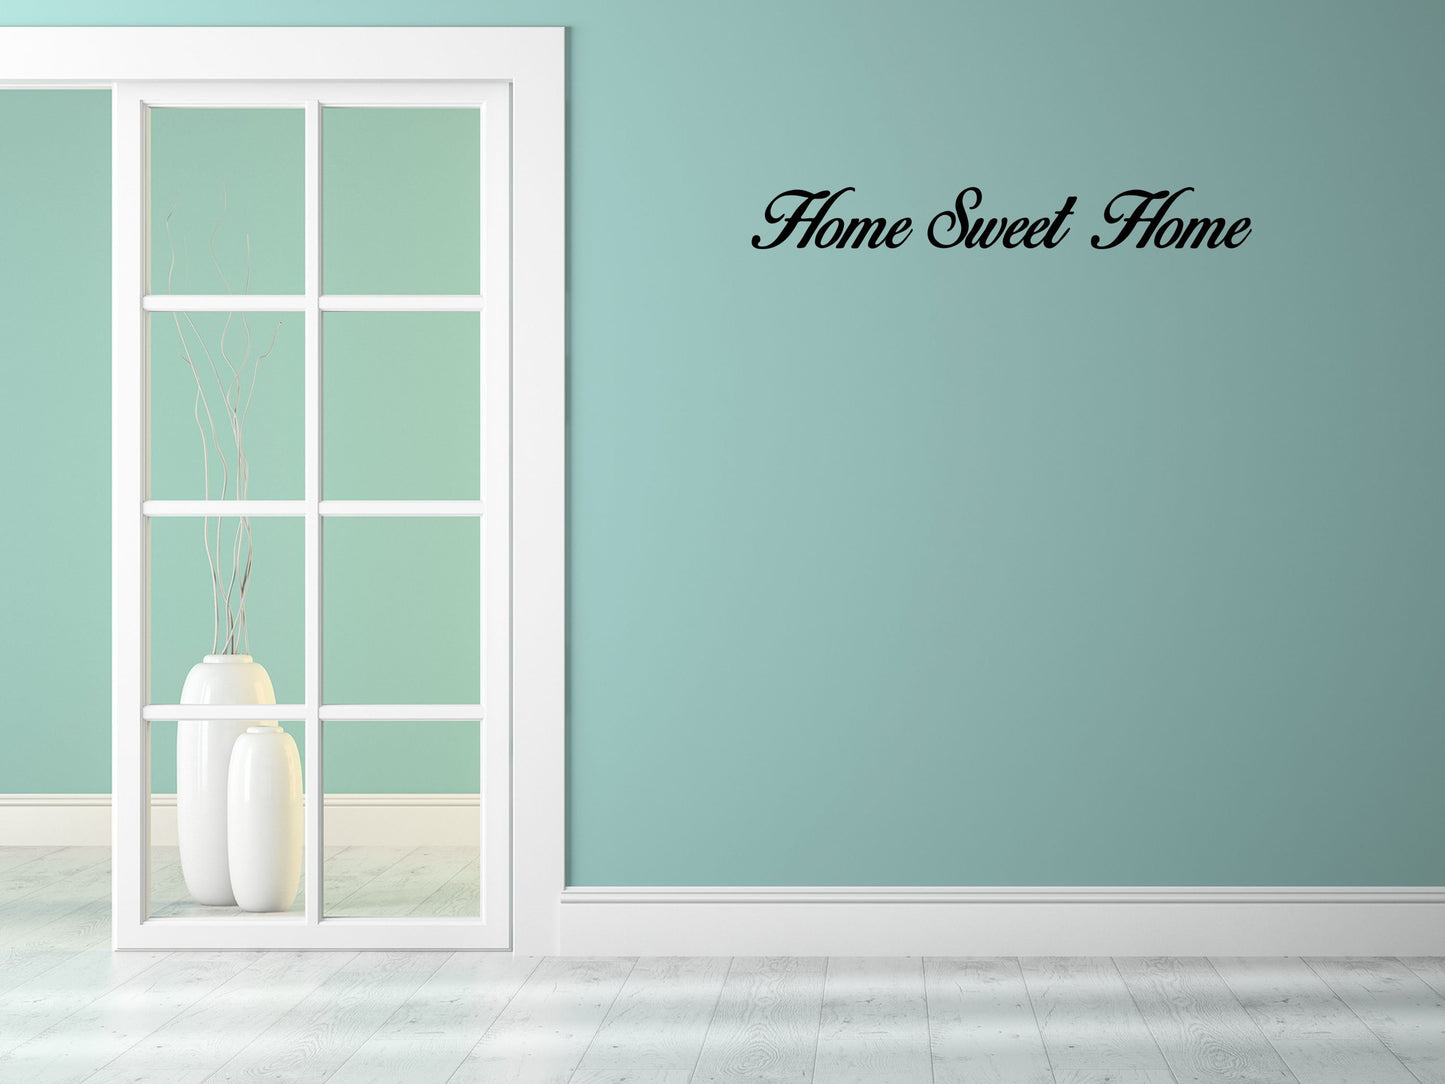 Home Sweet Home - Inspirational Wall Decals Vinyl Wall Decal Inspirational Wall Signs 